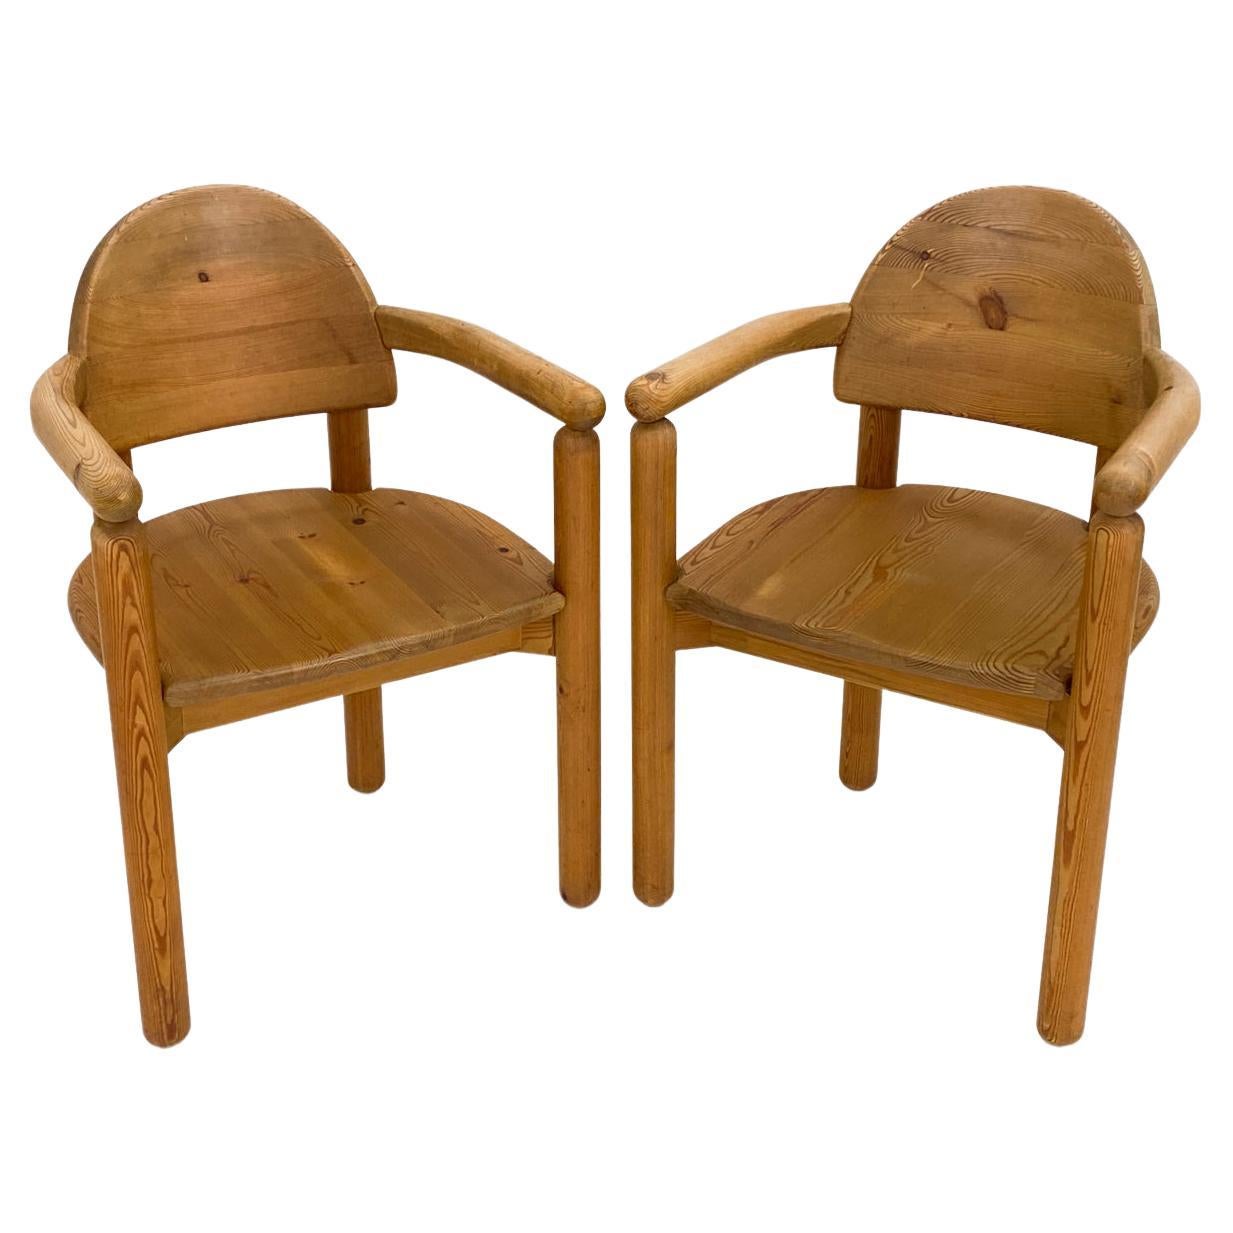  Pair of Pine Armchairs by Rainer Daumiller, Denmark, circa 1980 For Sale